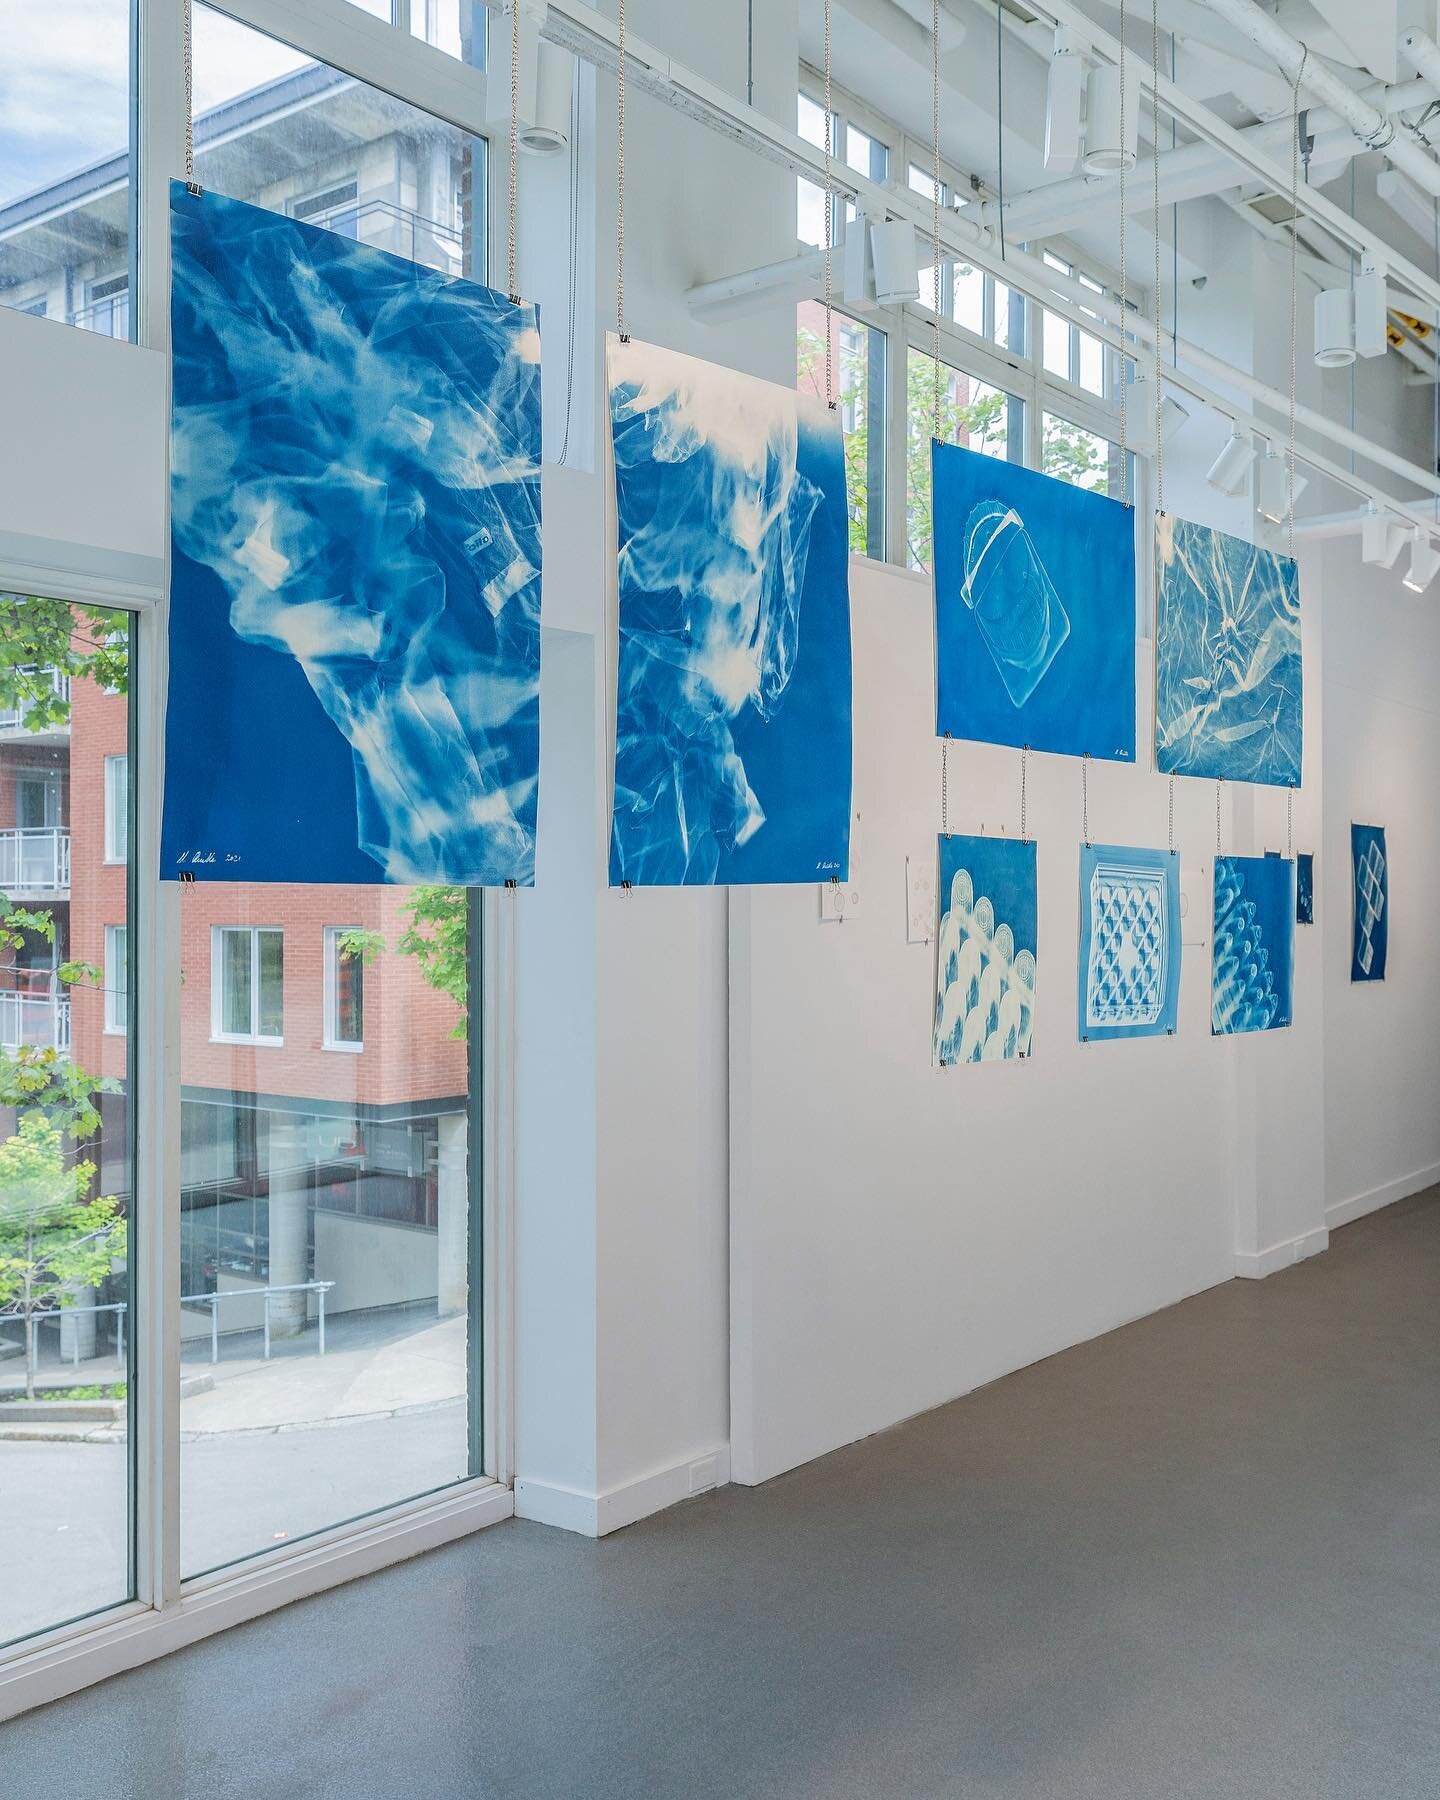 Just received some wonderful images by Marion Gotti of my show at @engrammequebec 

A huge thank you to the gallery for the lovely job curating and to @societyscottishartists for organising! 💙
.
.
#engramme #artexchange #anthropocene #air #cleanair 